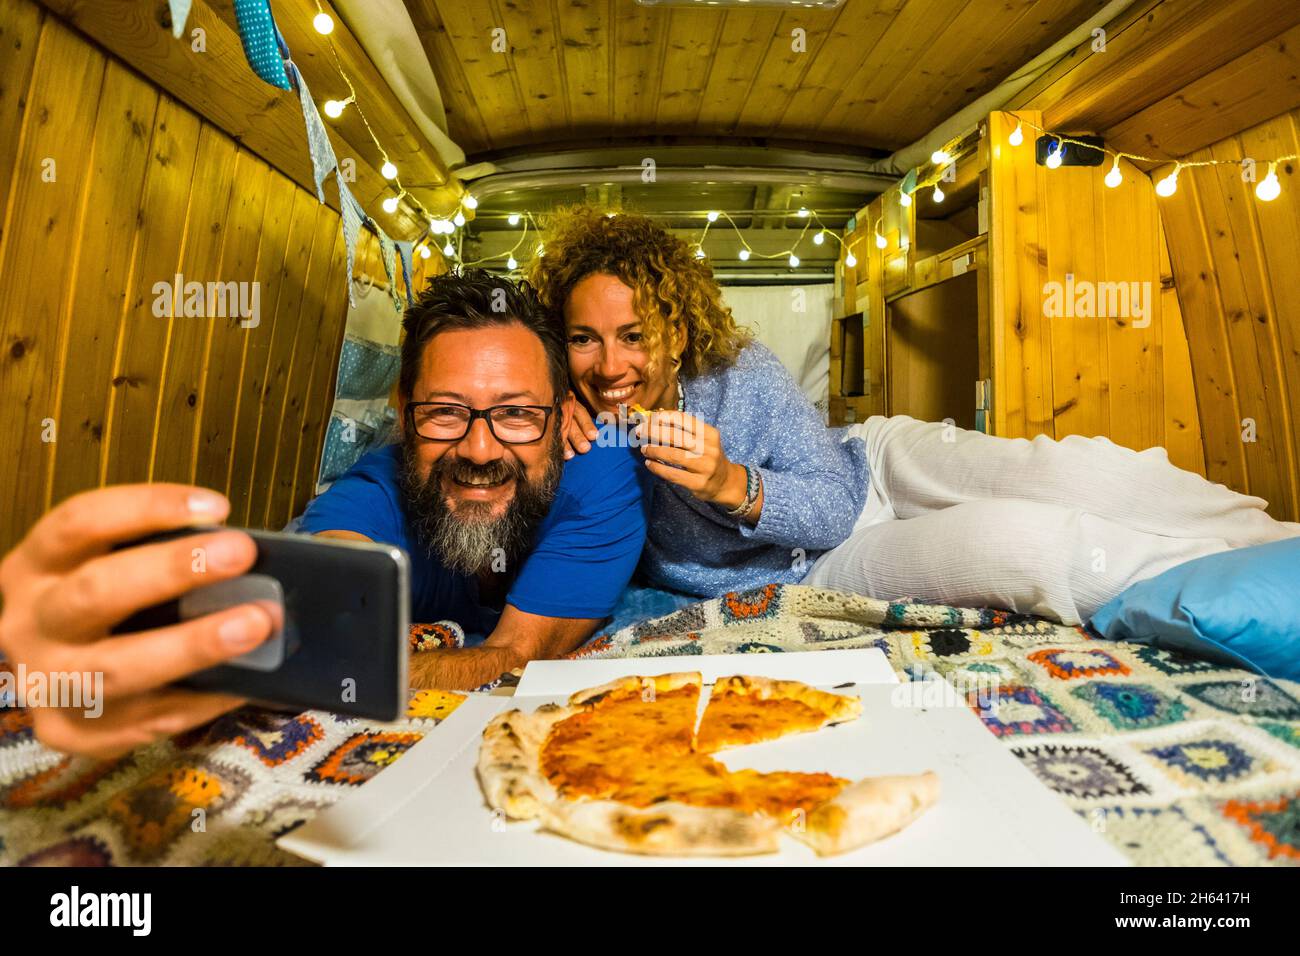 adult couple eat pizza and take selfie inside old clasic vintage home made wooden van in travel vacation together smiling and having fun - alternative adventure home camper lifestyle people Stock Photo